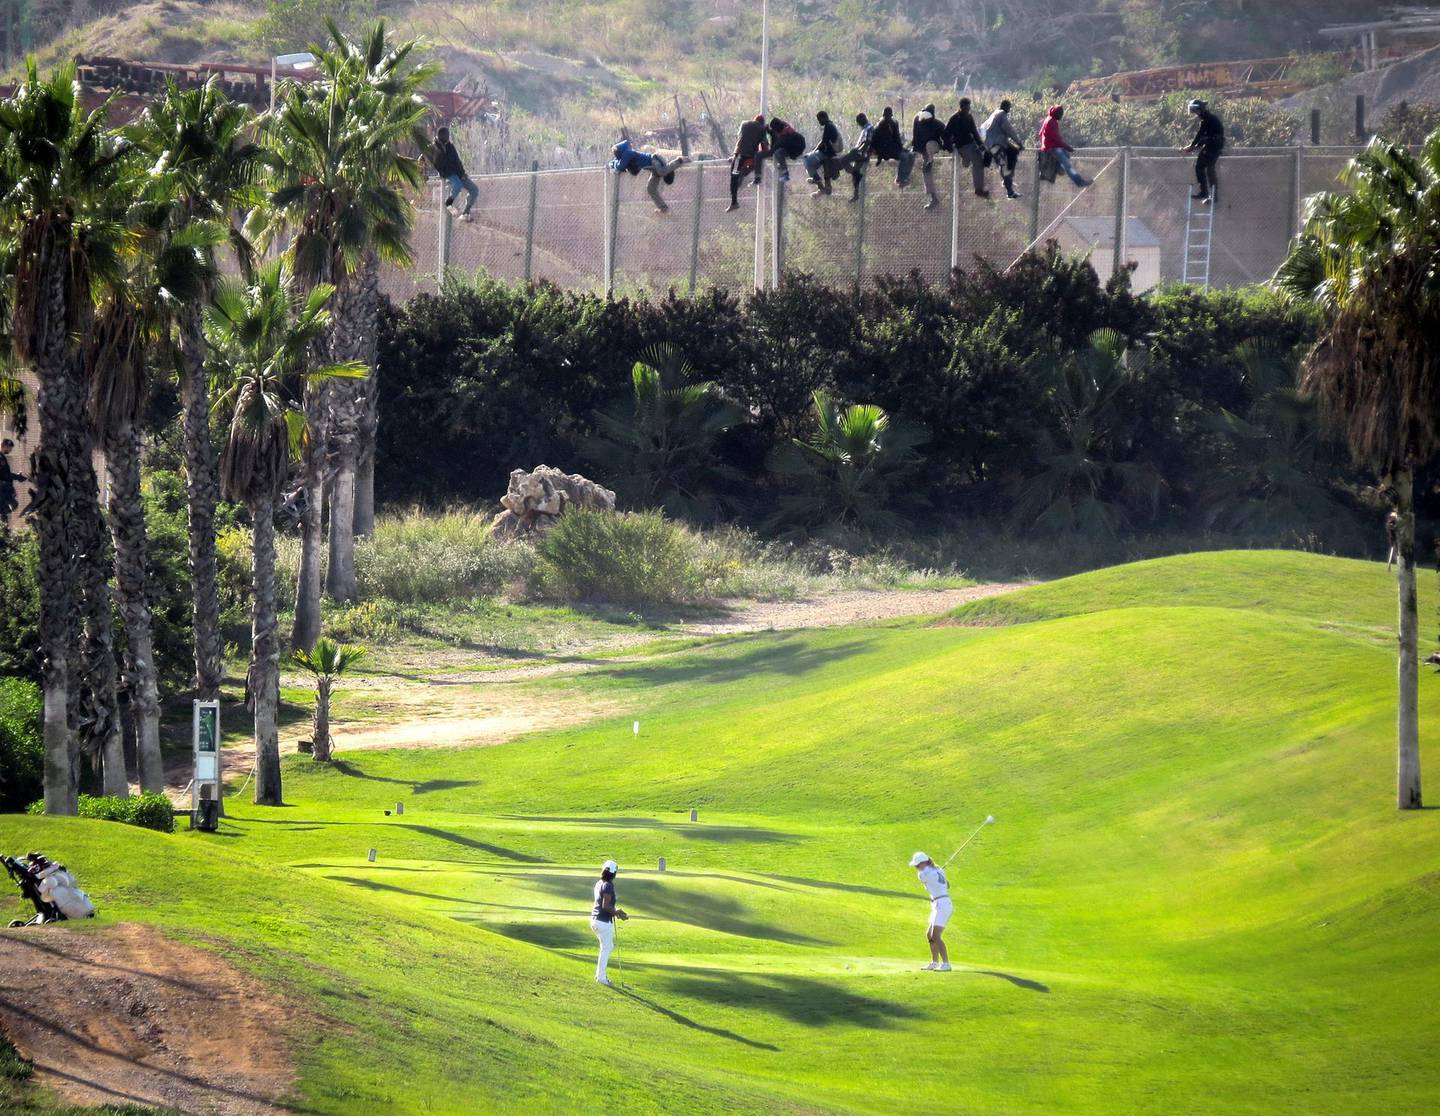 A golfer hits a tee shot as African migrants sit atop a border fence during an attempt to cross into Spanish territories between Morocco and Spain's north African enclave of Melilla October 22, 2014. Around 400 migrants attempted to cross the border into Spain, according to local media. Picture taken October 22, 2014. REUTERS/Jose Palazon  (SPAIN - Tags: SPORT GOLF SOCIETY IMMIGRATION TPX IMAGES OF THE DAY)  BEST QUALITY AVAILABLE - GM1EAAN1CDU01